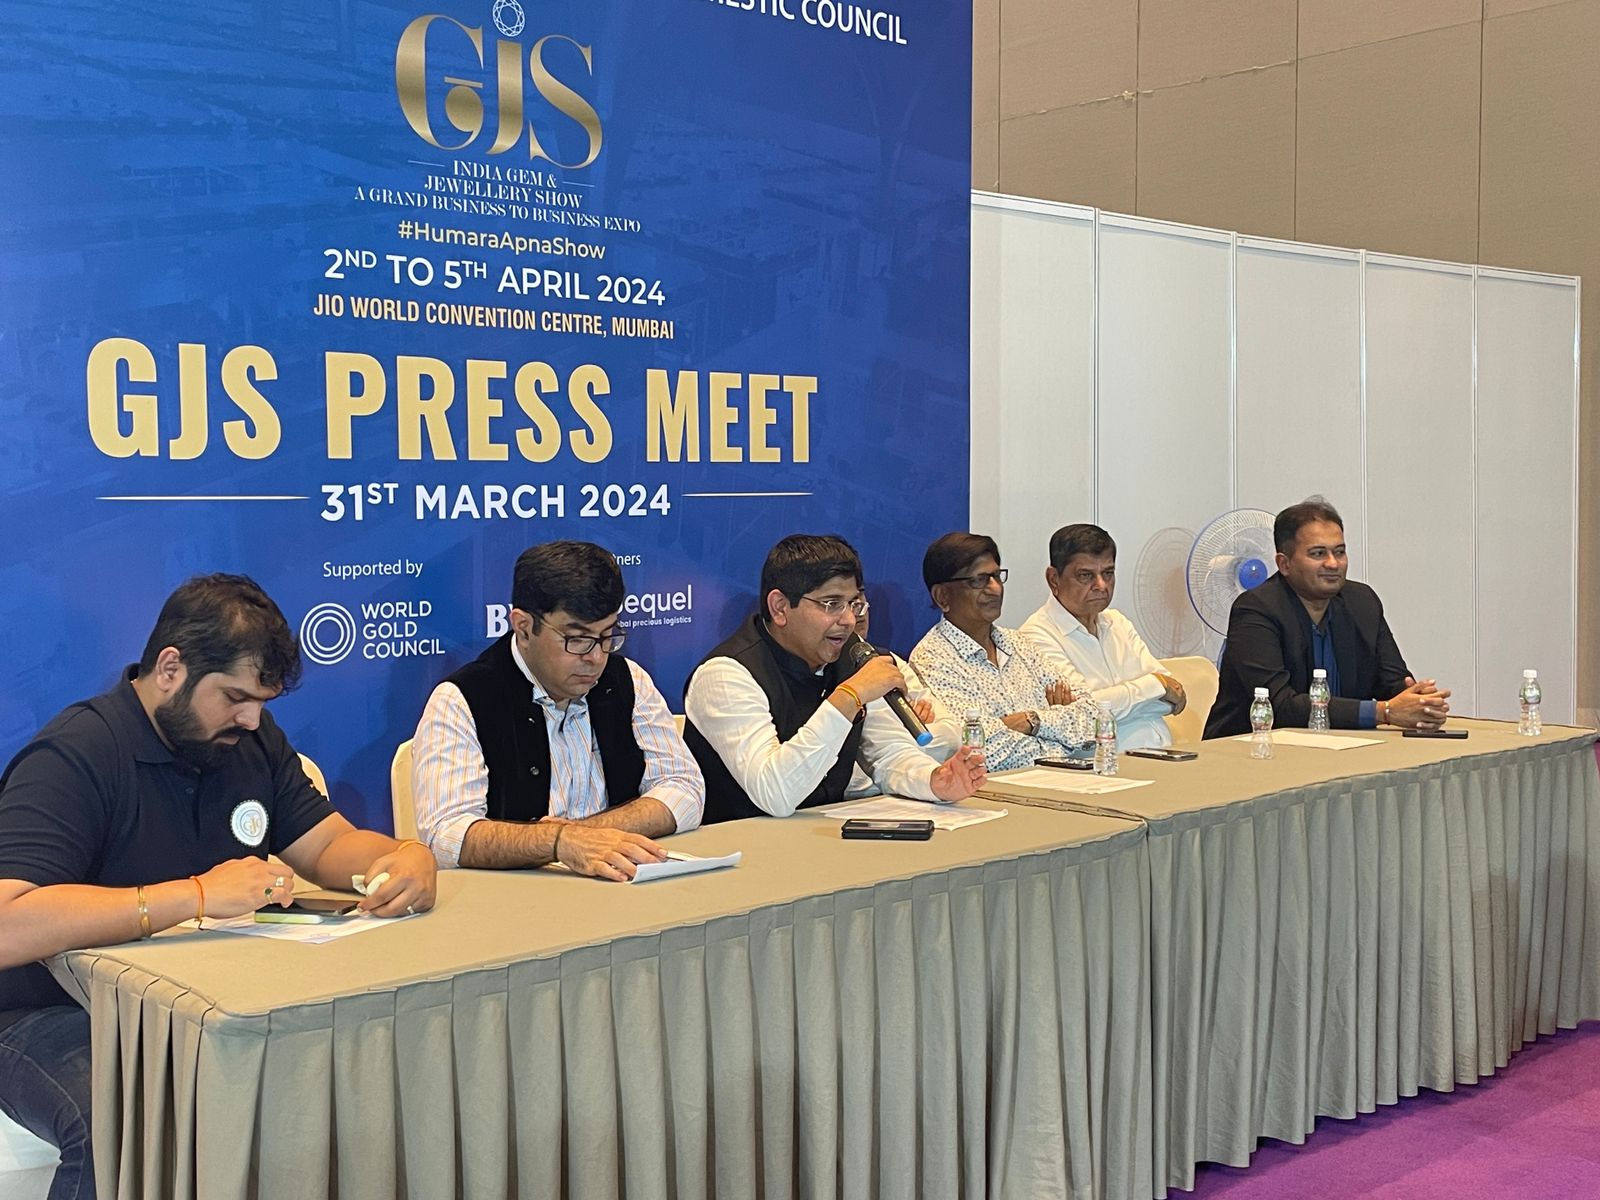 GJC Unveils Details for the 5th Edition of India Gems and Jewellery Show (GJS) in April 2024